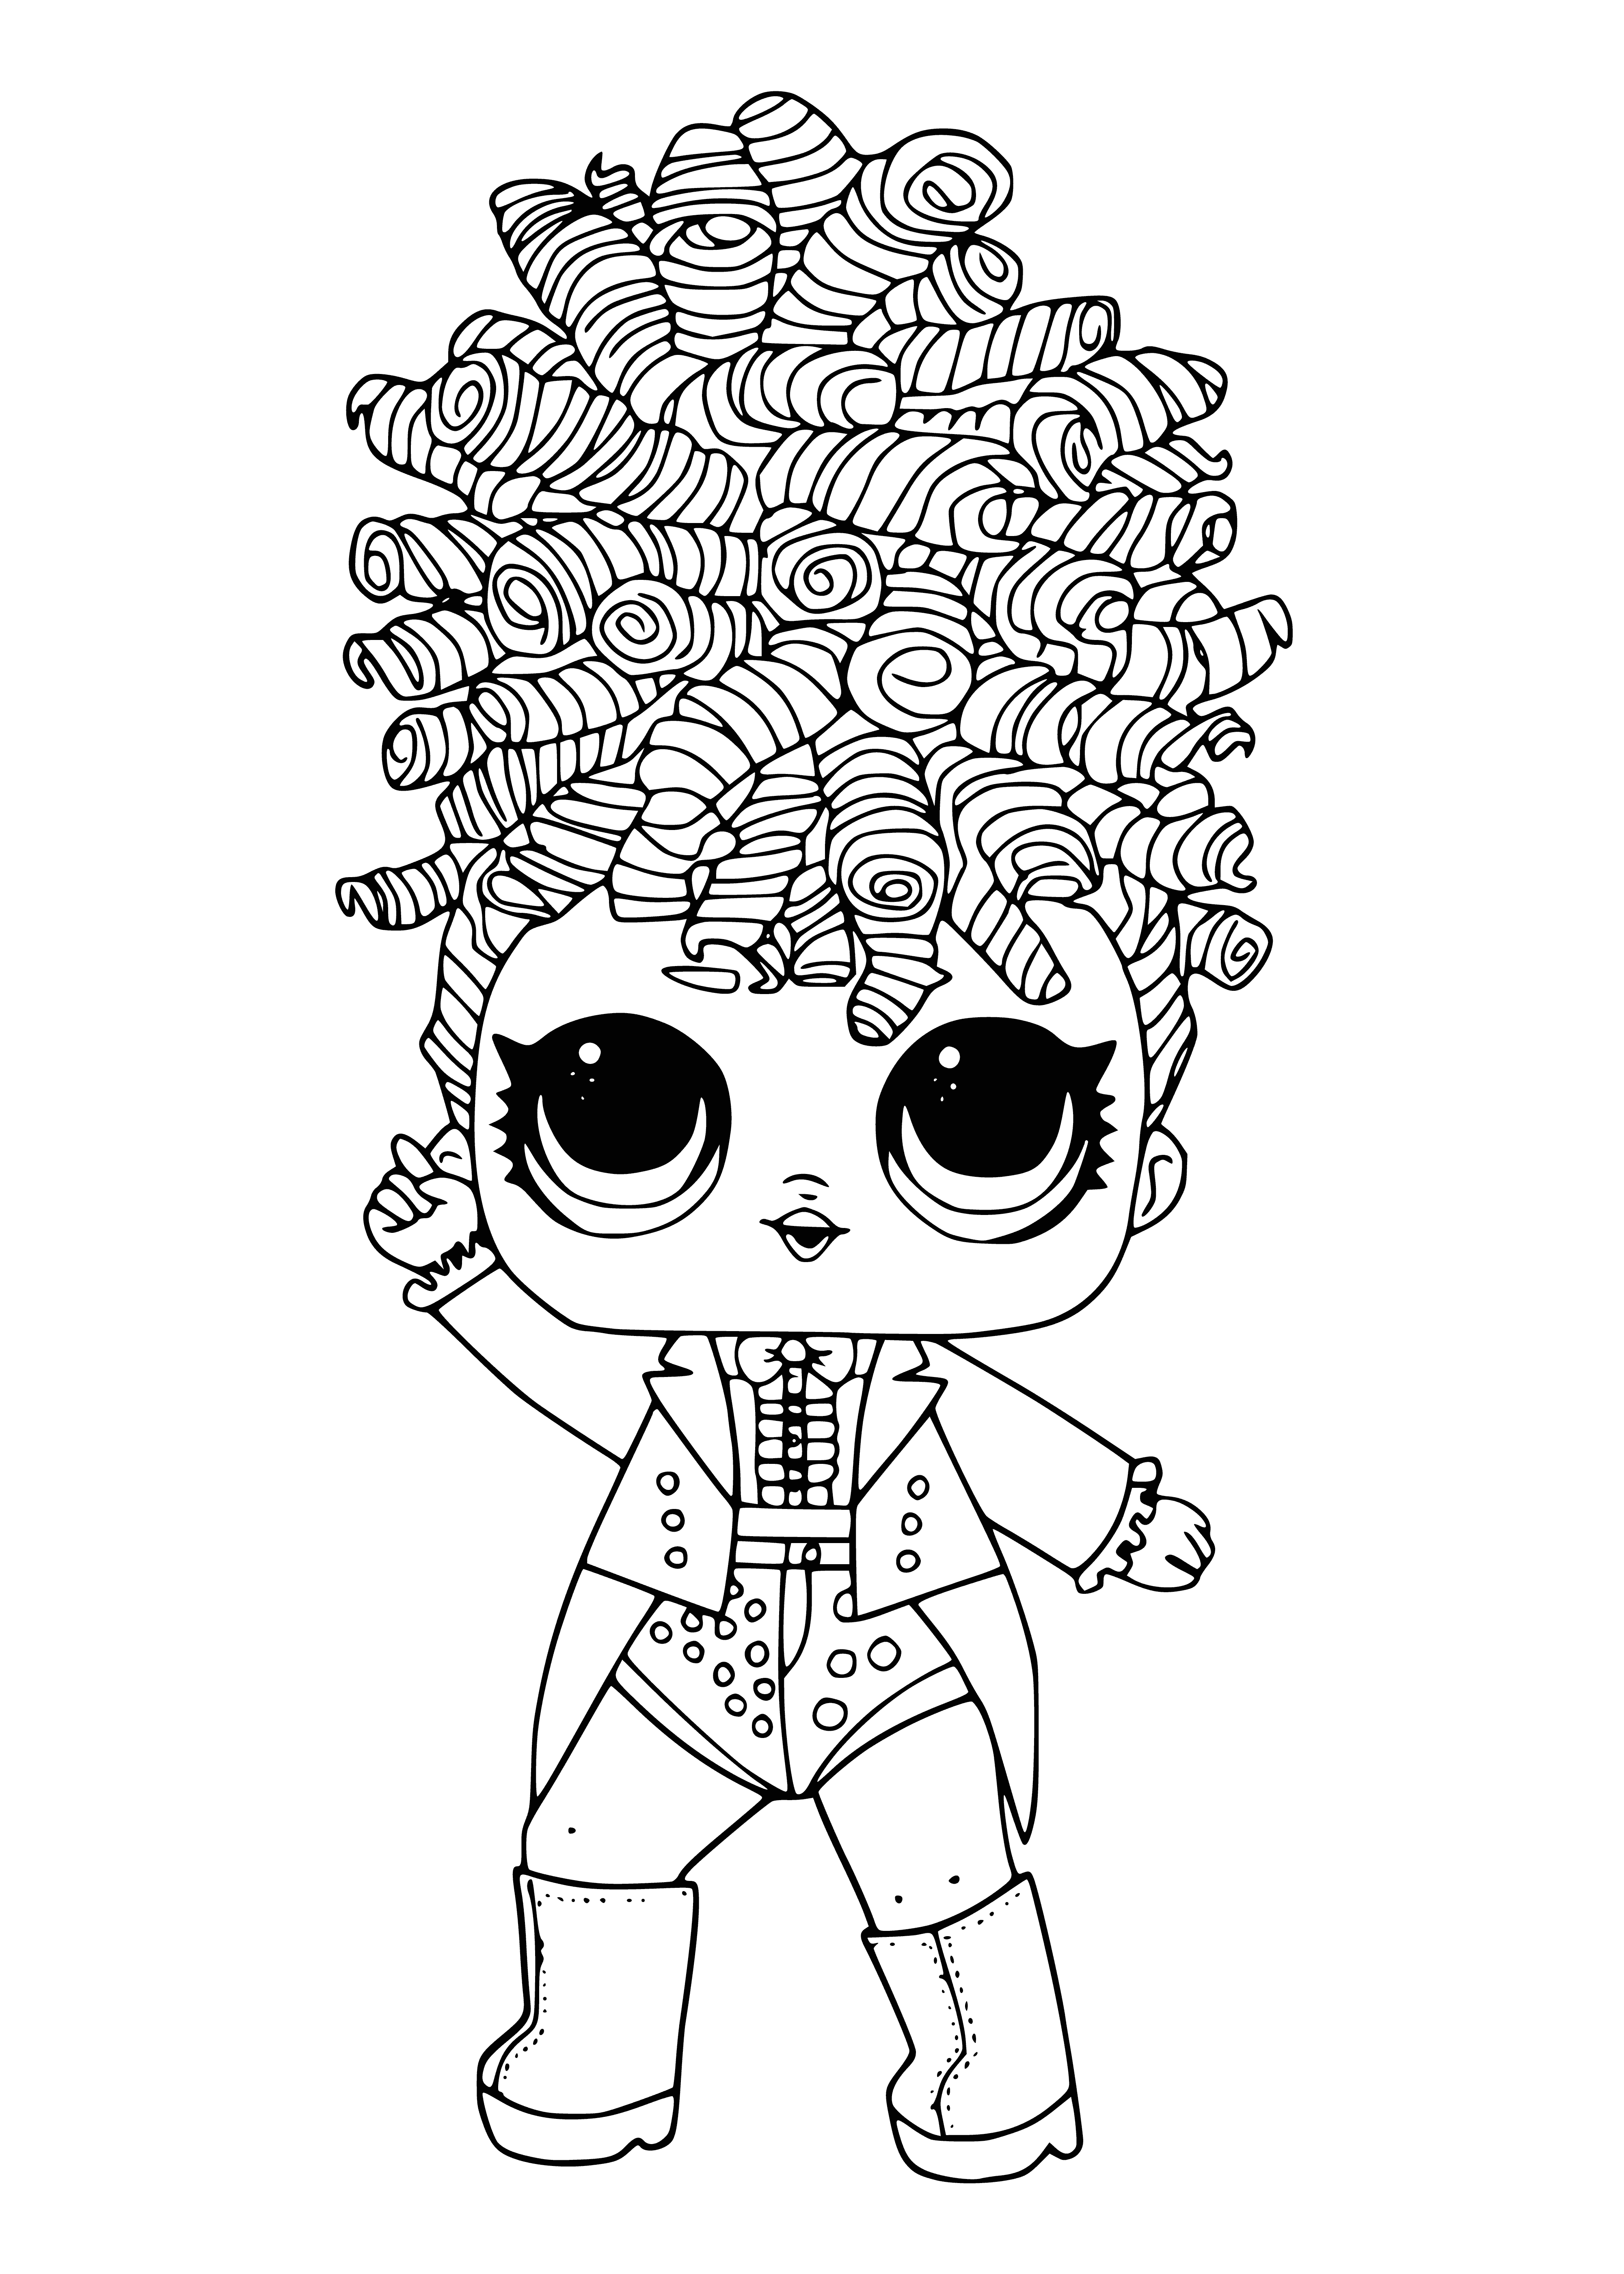 coloring page: Cheerful Black girl has long curly hair, bow-adorned headband, hoop earrings, striped shirt & black & white shoes. #BlackGirlMagic